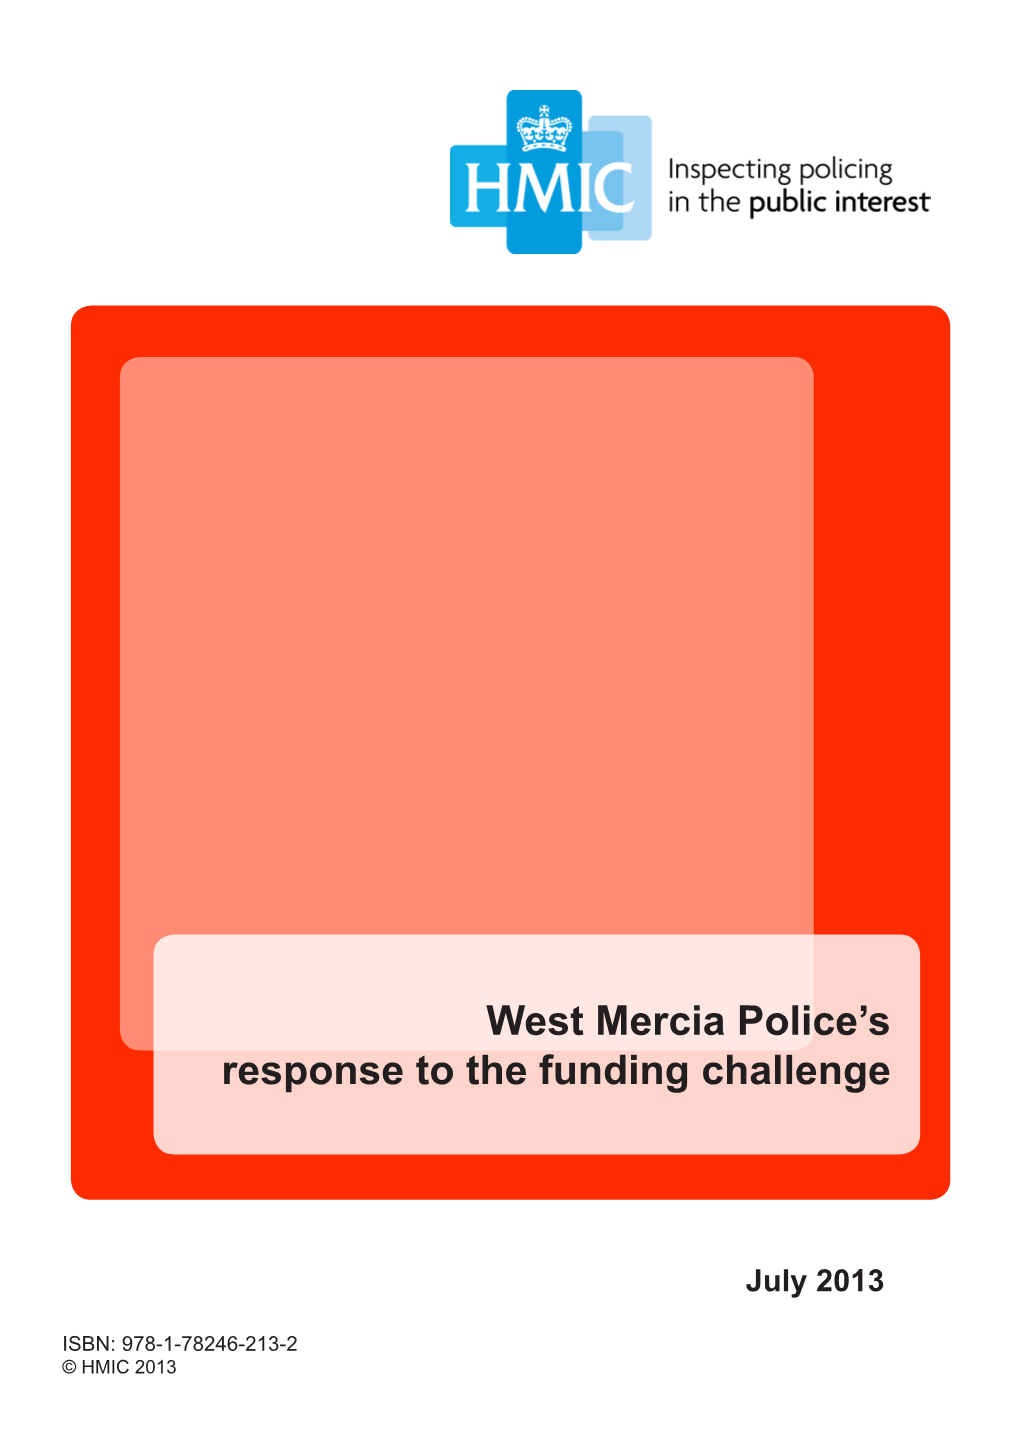 West Mercia Police's Response to the Funding Challenge